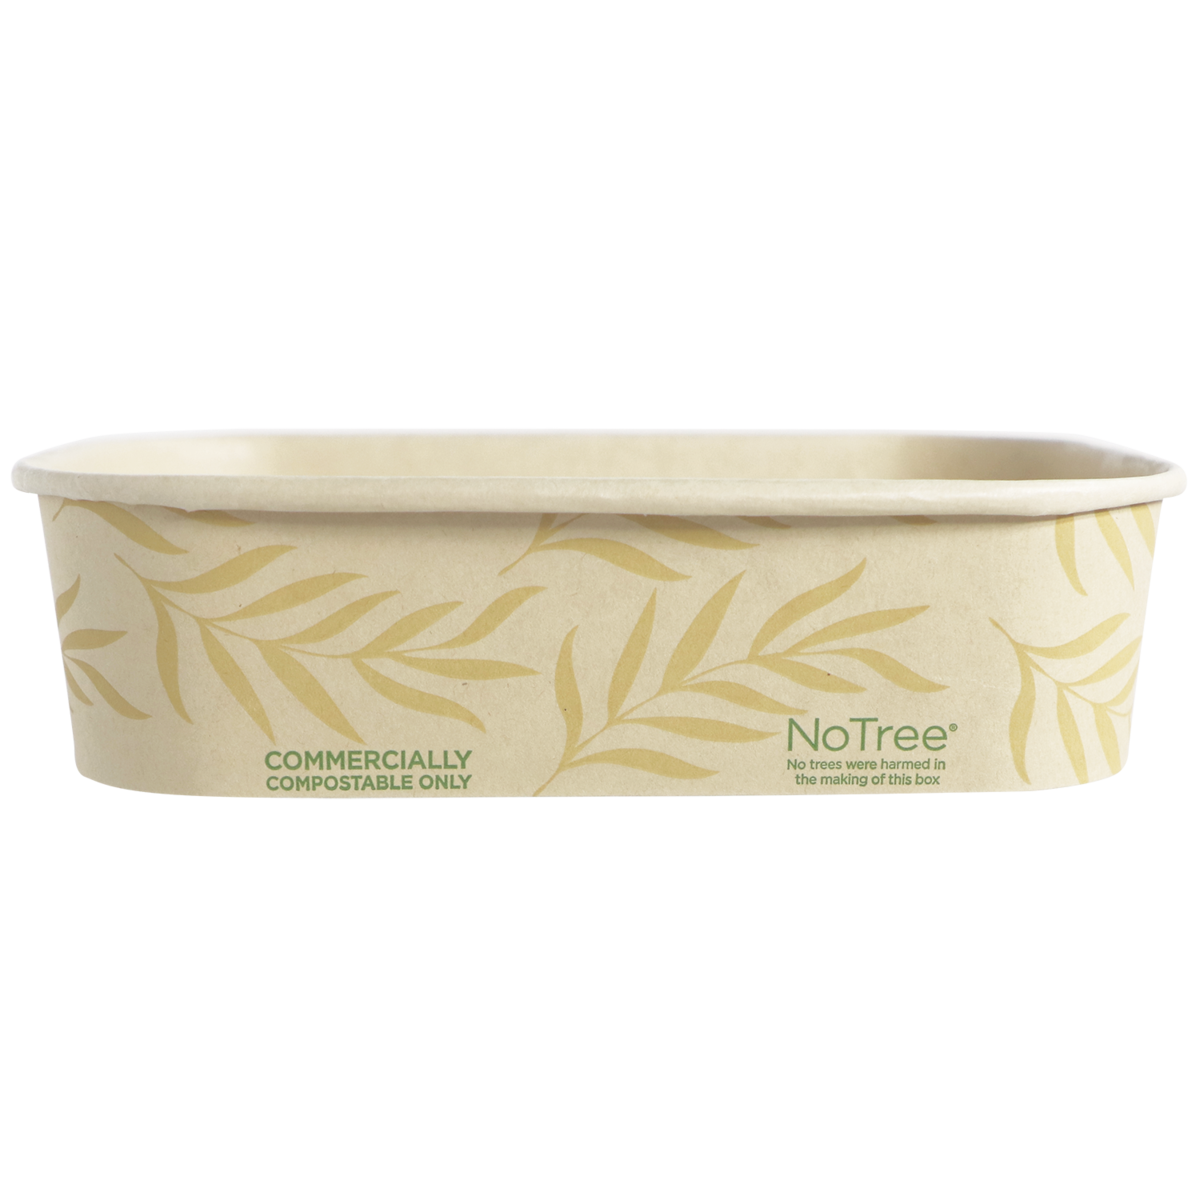 World Centric CT-NT-16 - 16oz NoTree Rectangular Container - Case of 300